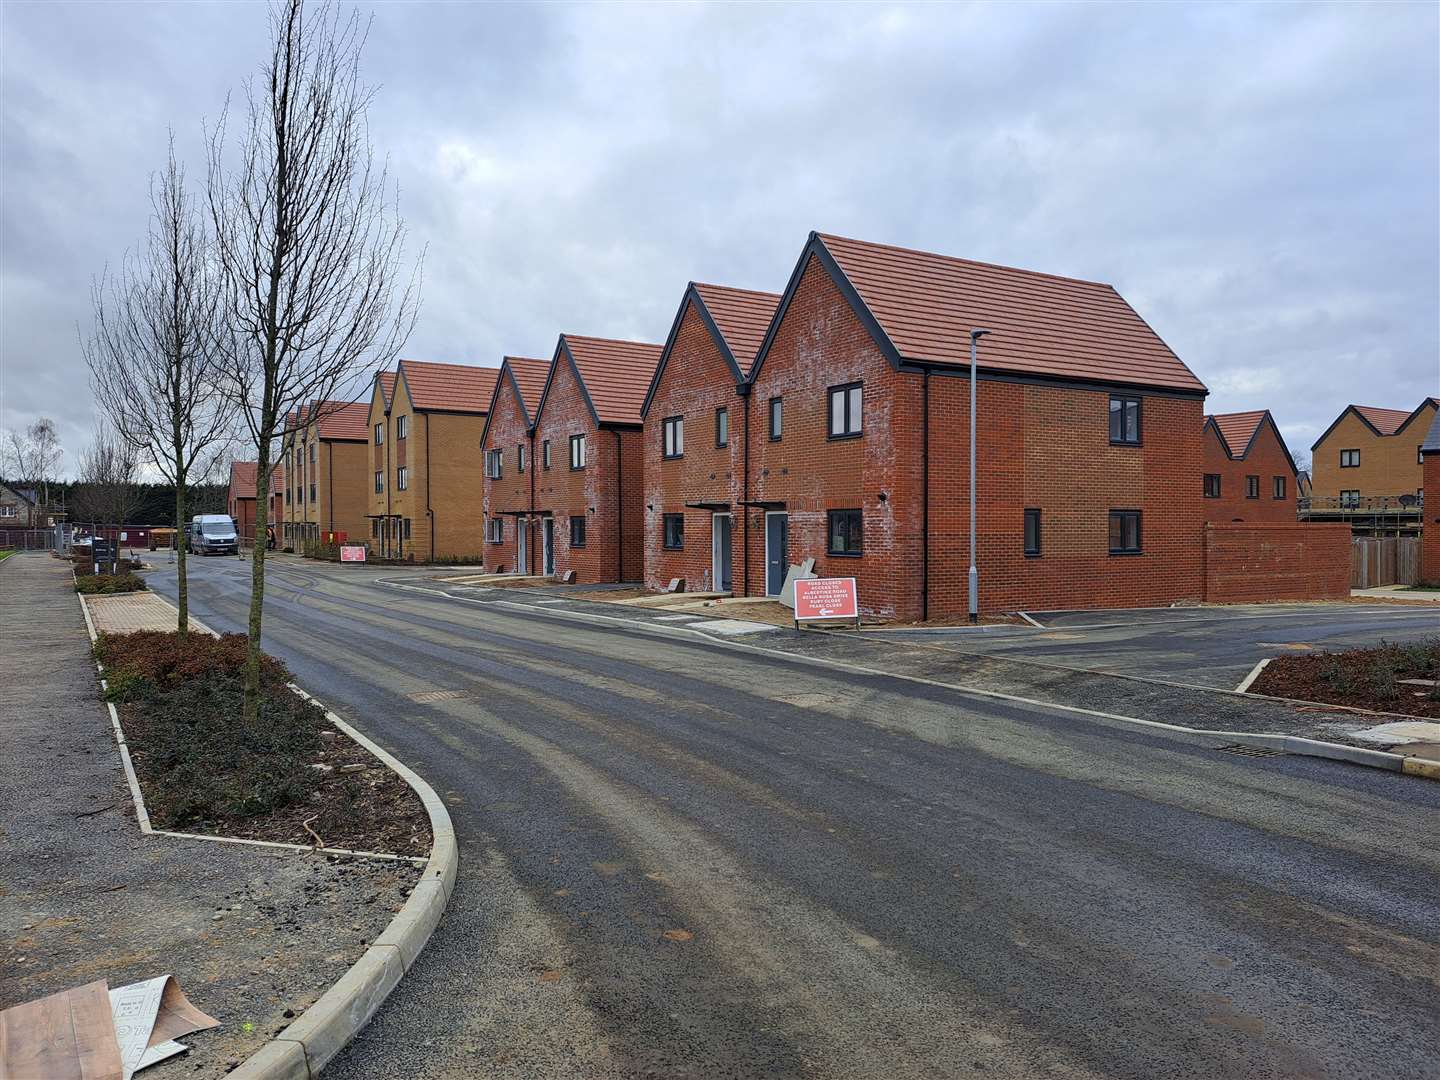 Bellway Homes at the Rosewood development off Sutton Road, Maidstone